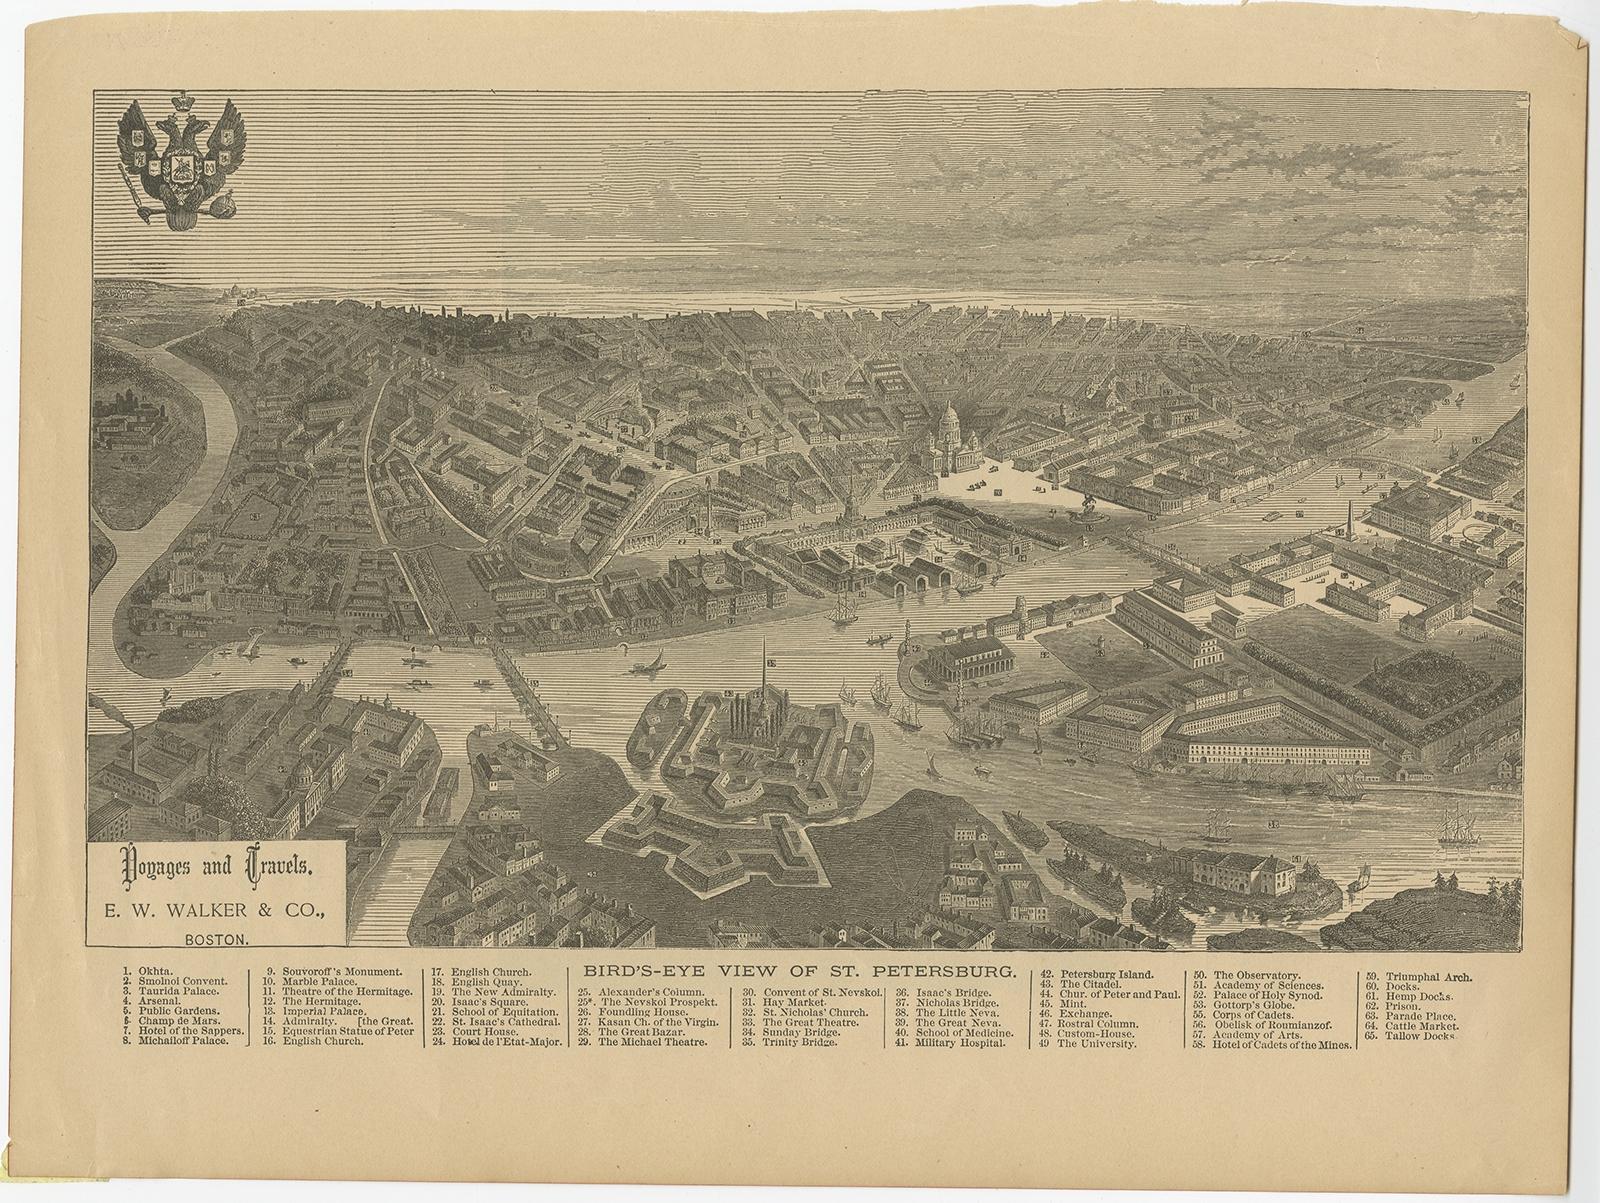 Description: Antique print titled 'Birds-Eye View of St. Petersburg'. 

Old print with a view of Saint Petersburg, Russia. Originates from 'Voyages and Travels'. 

Artists and Engravers: Published by E.W. Walker & Co, Boston. 

Condition: